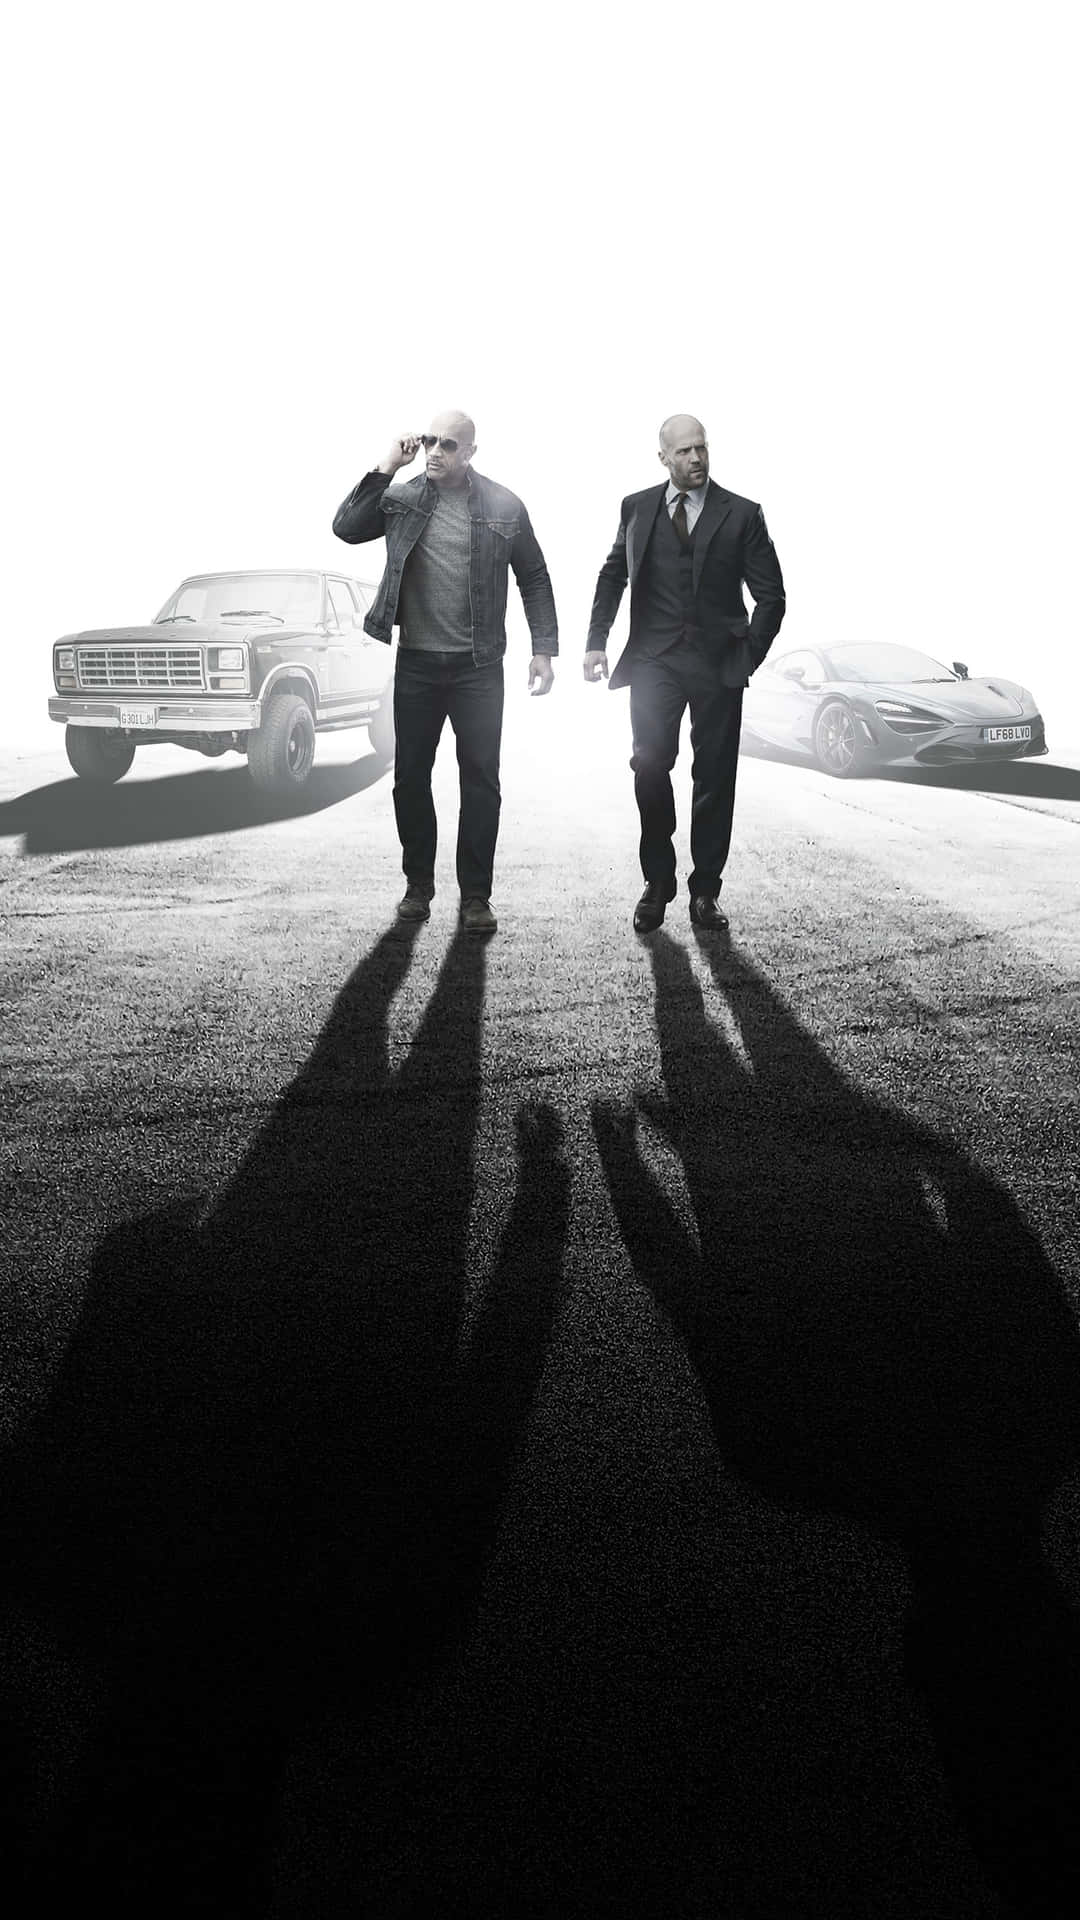 Drive Fast and Furious with Your Iphone Wallpaper